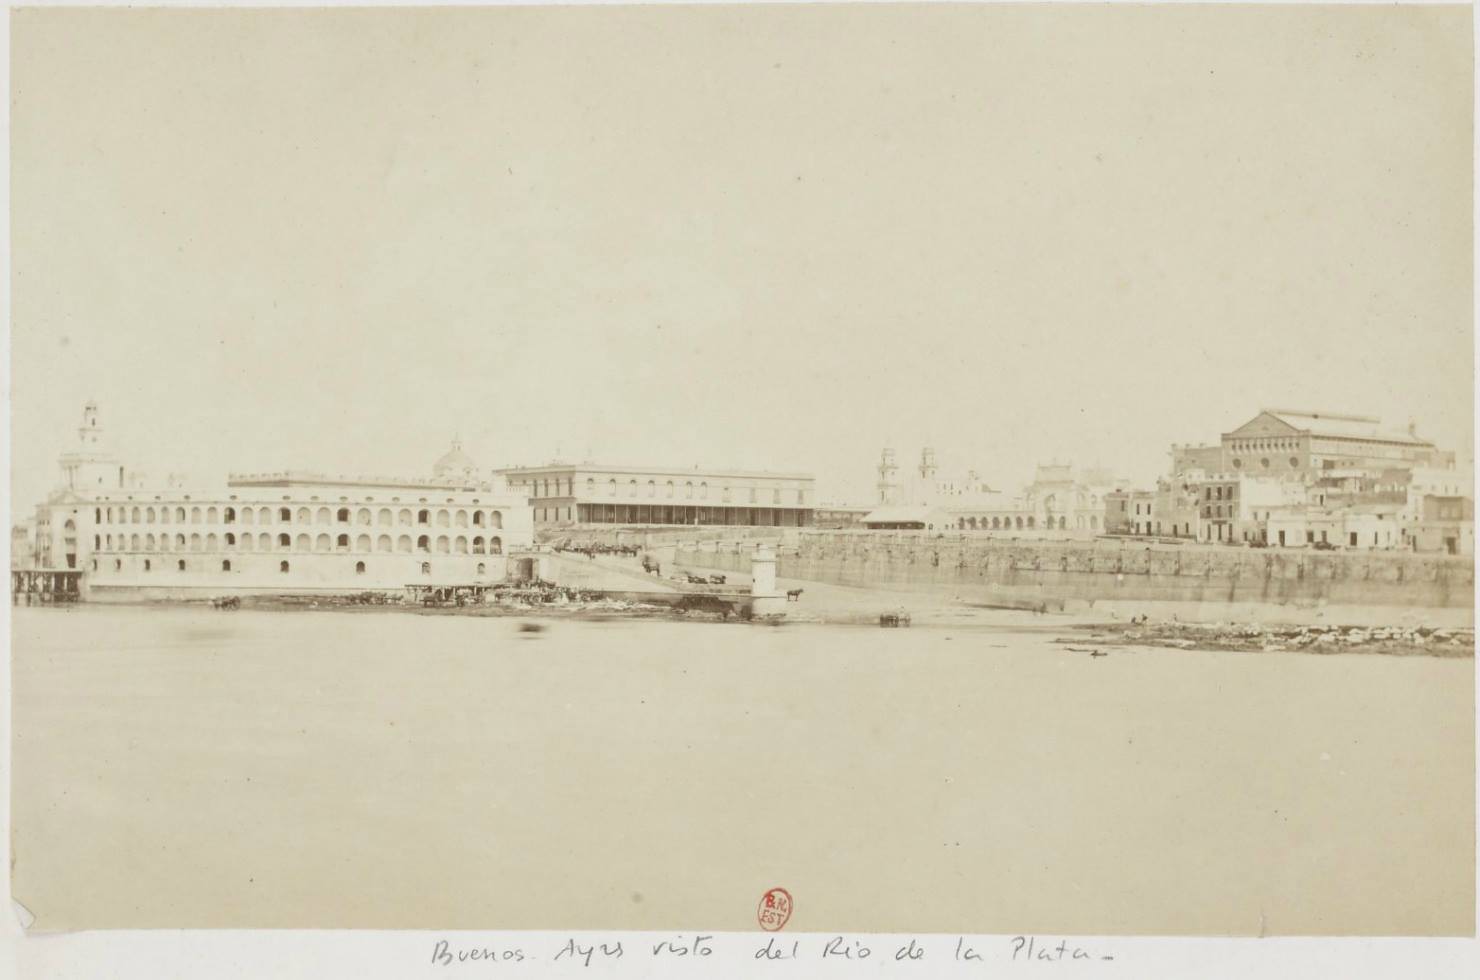 Rare Historical Photos of Buenos Aires, Argentina, from the 1870s